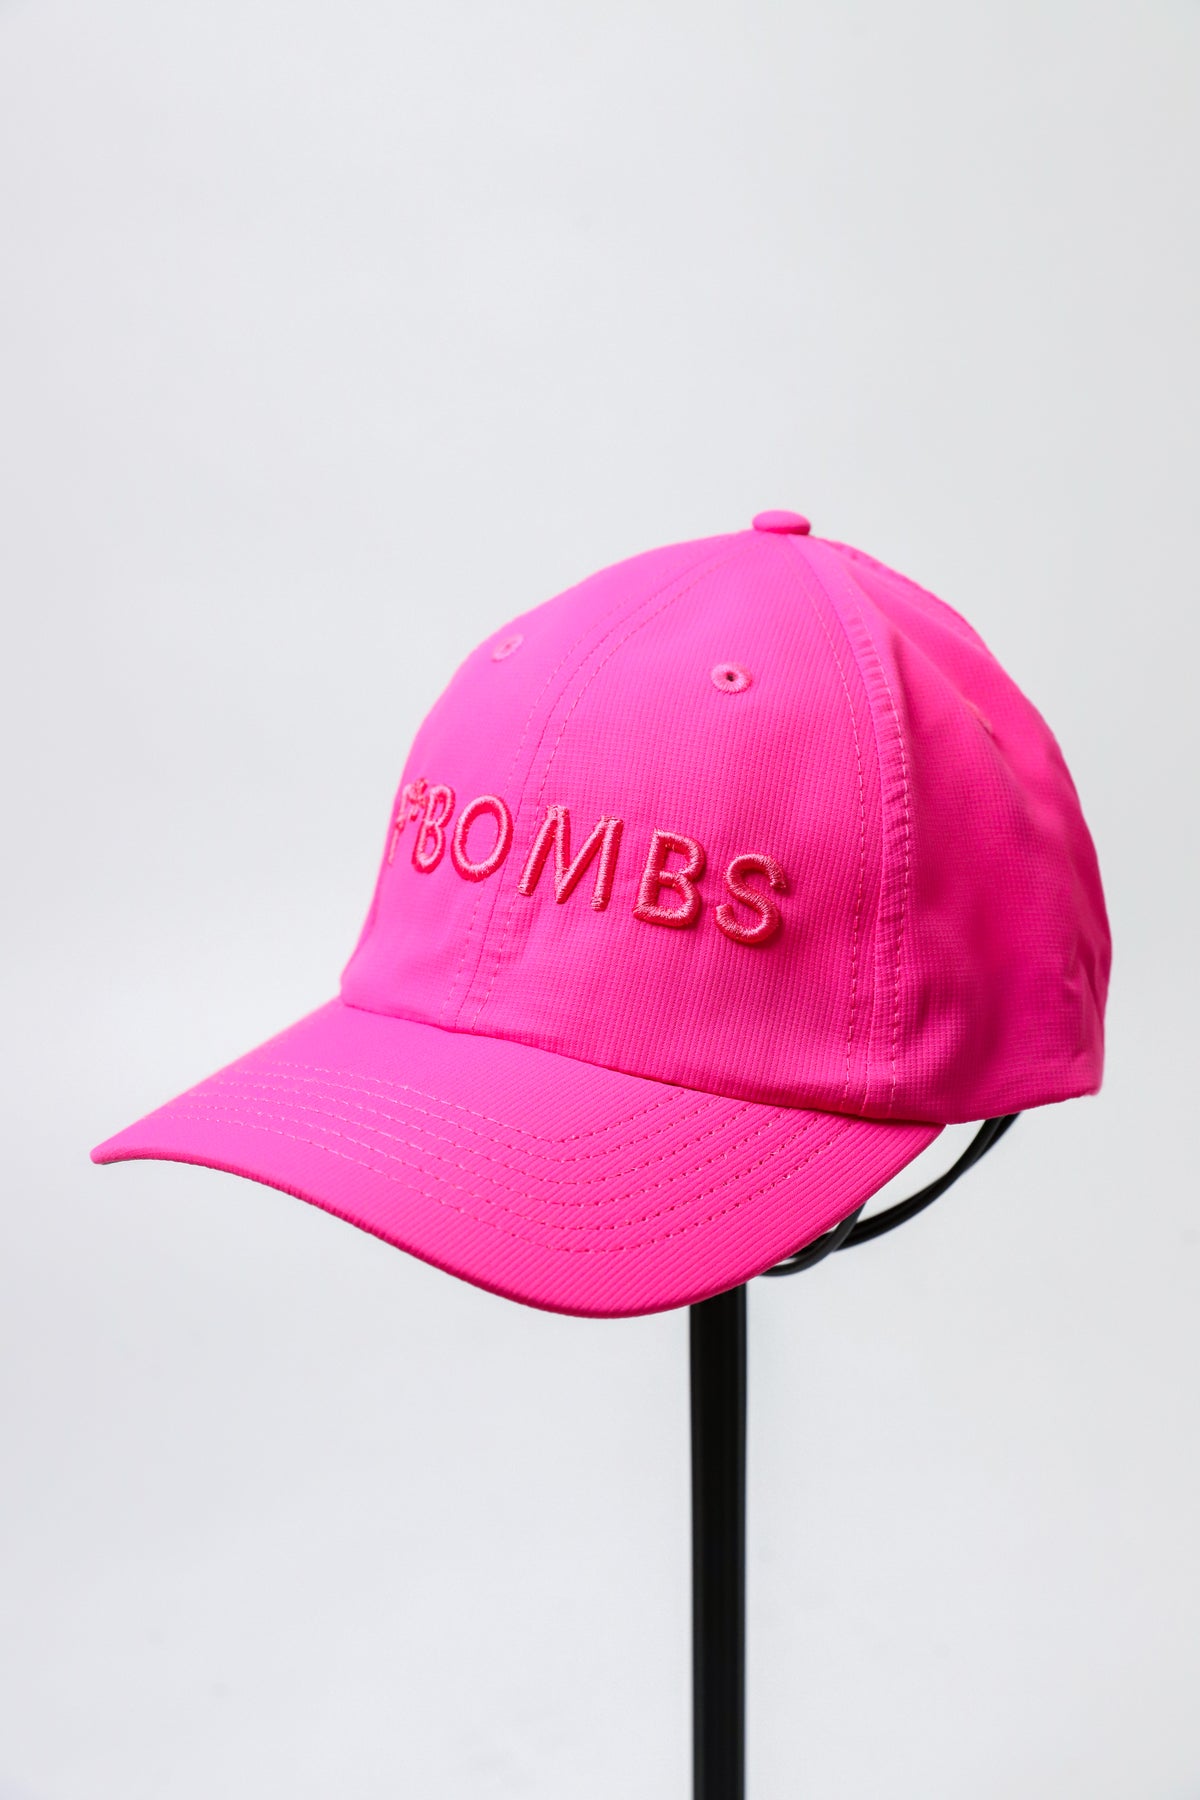 F*BOMBS Small Fit Hat  *Restock May 1st*